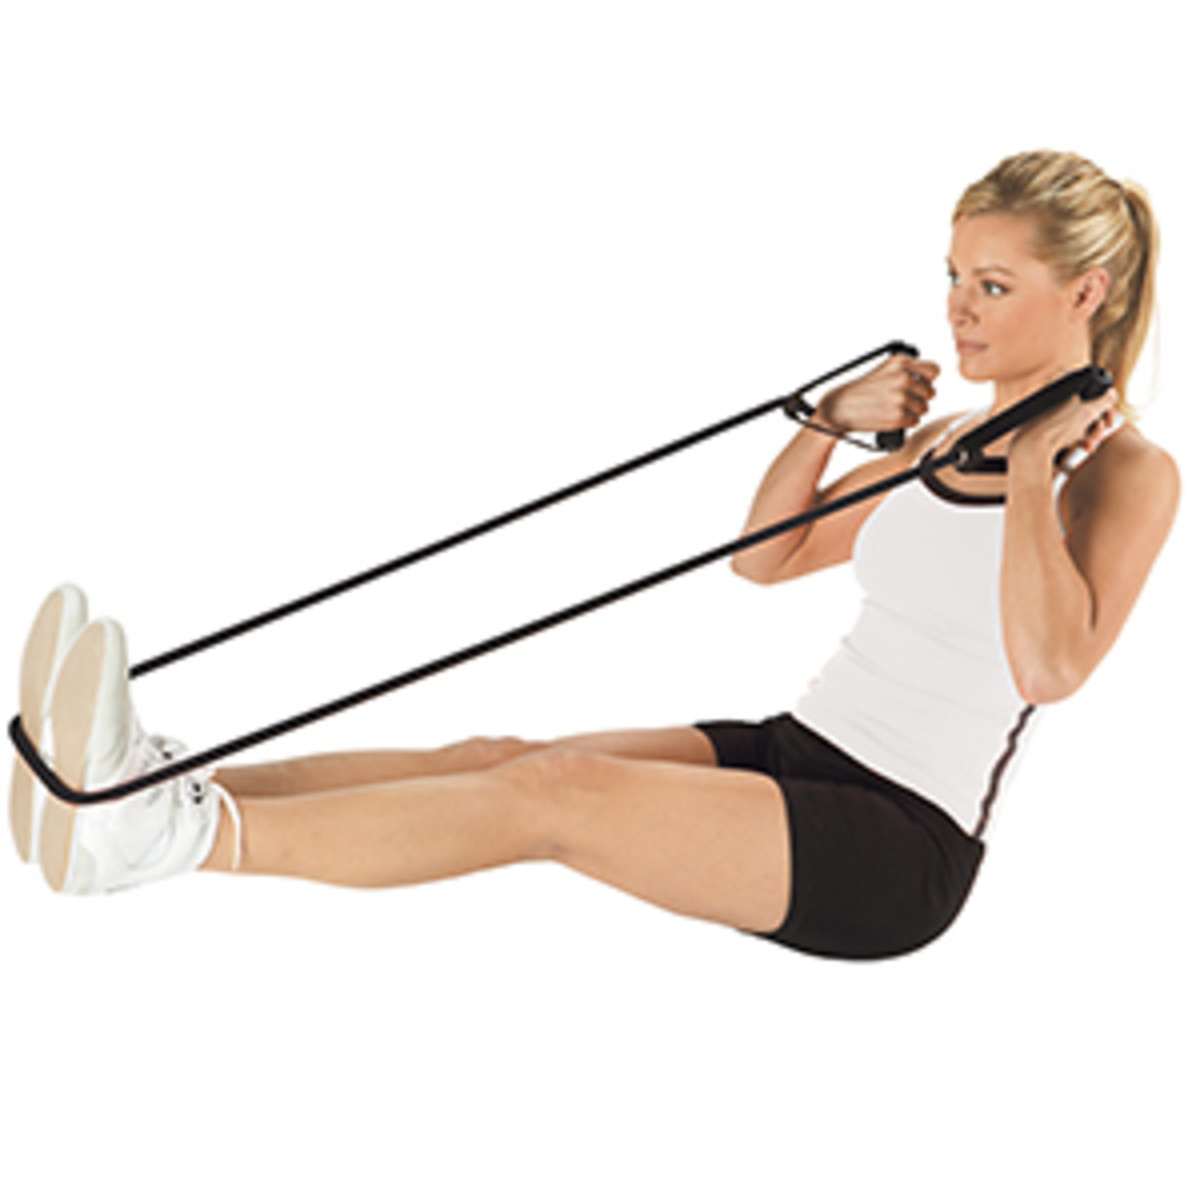 Resistance Band Exercise Posters and What To Look for When Buying Exercise Bands - Buy Online